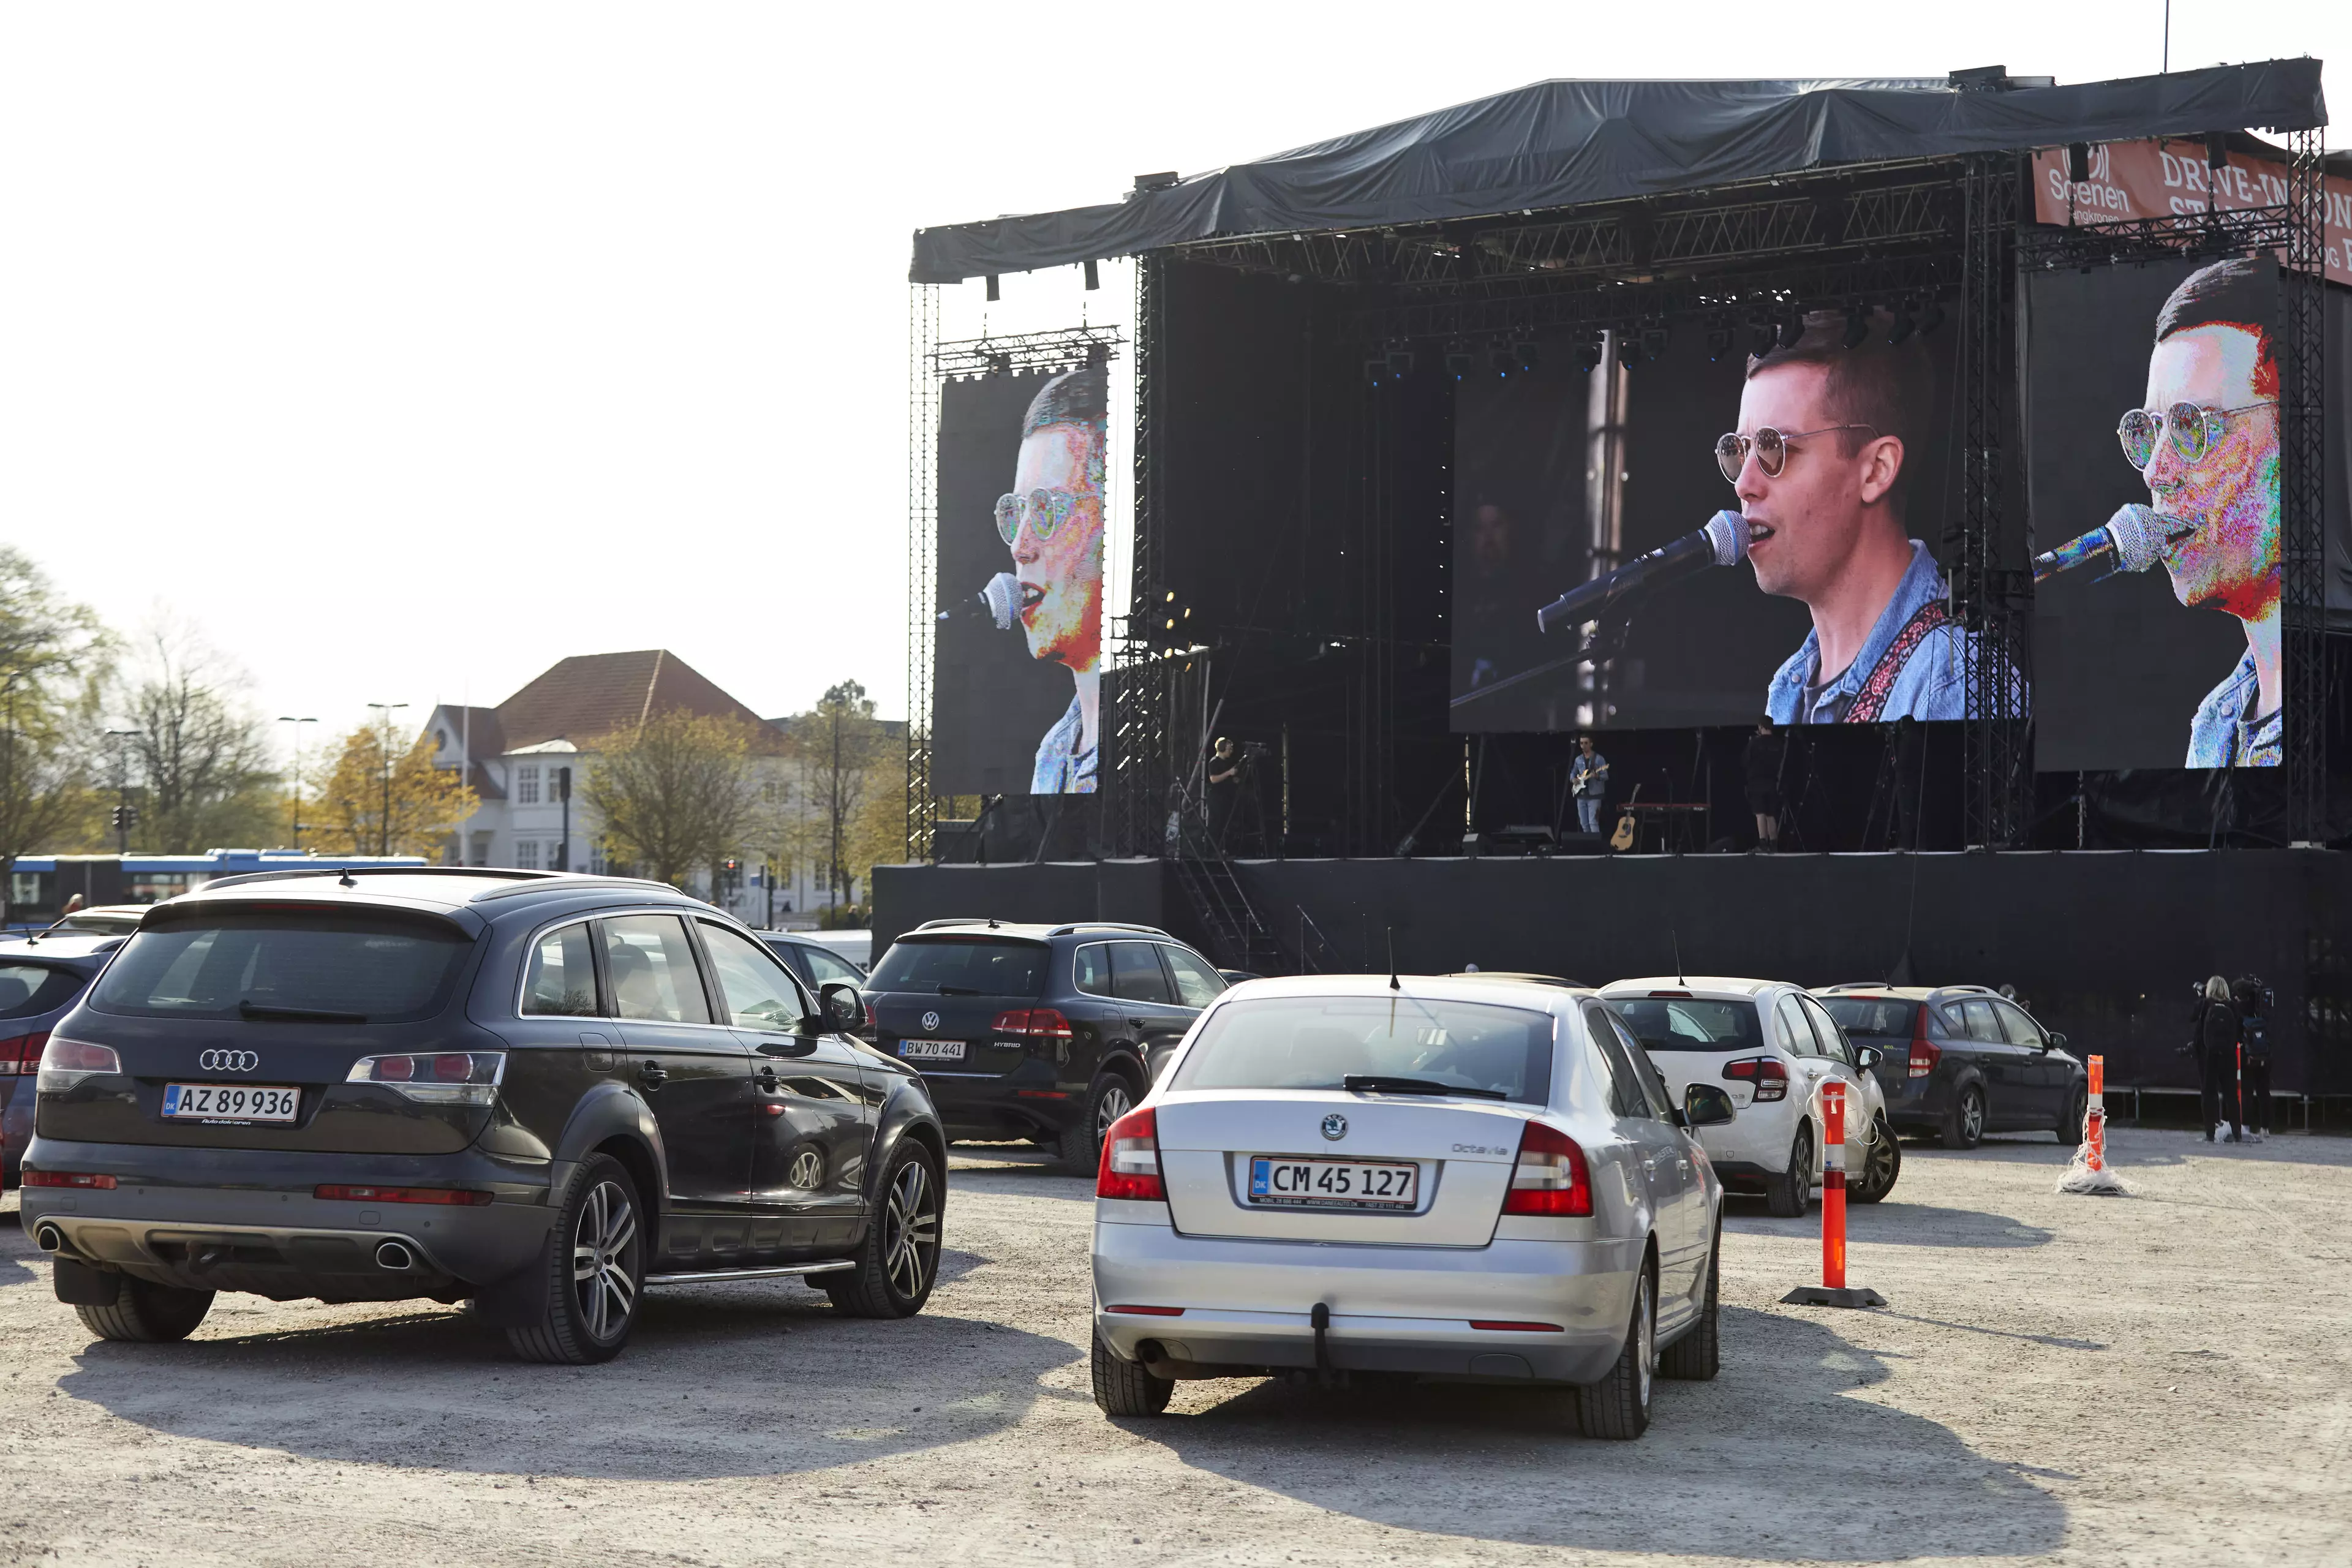 Danish singer Mads Langer as he performs at a sold-out drive-in concert in Aarhus.